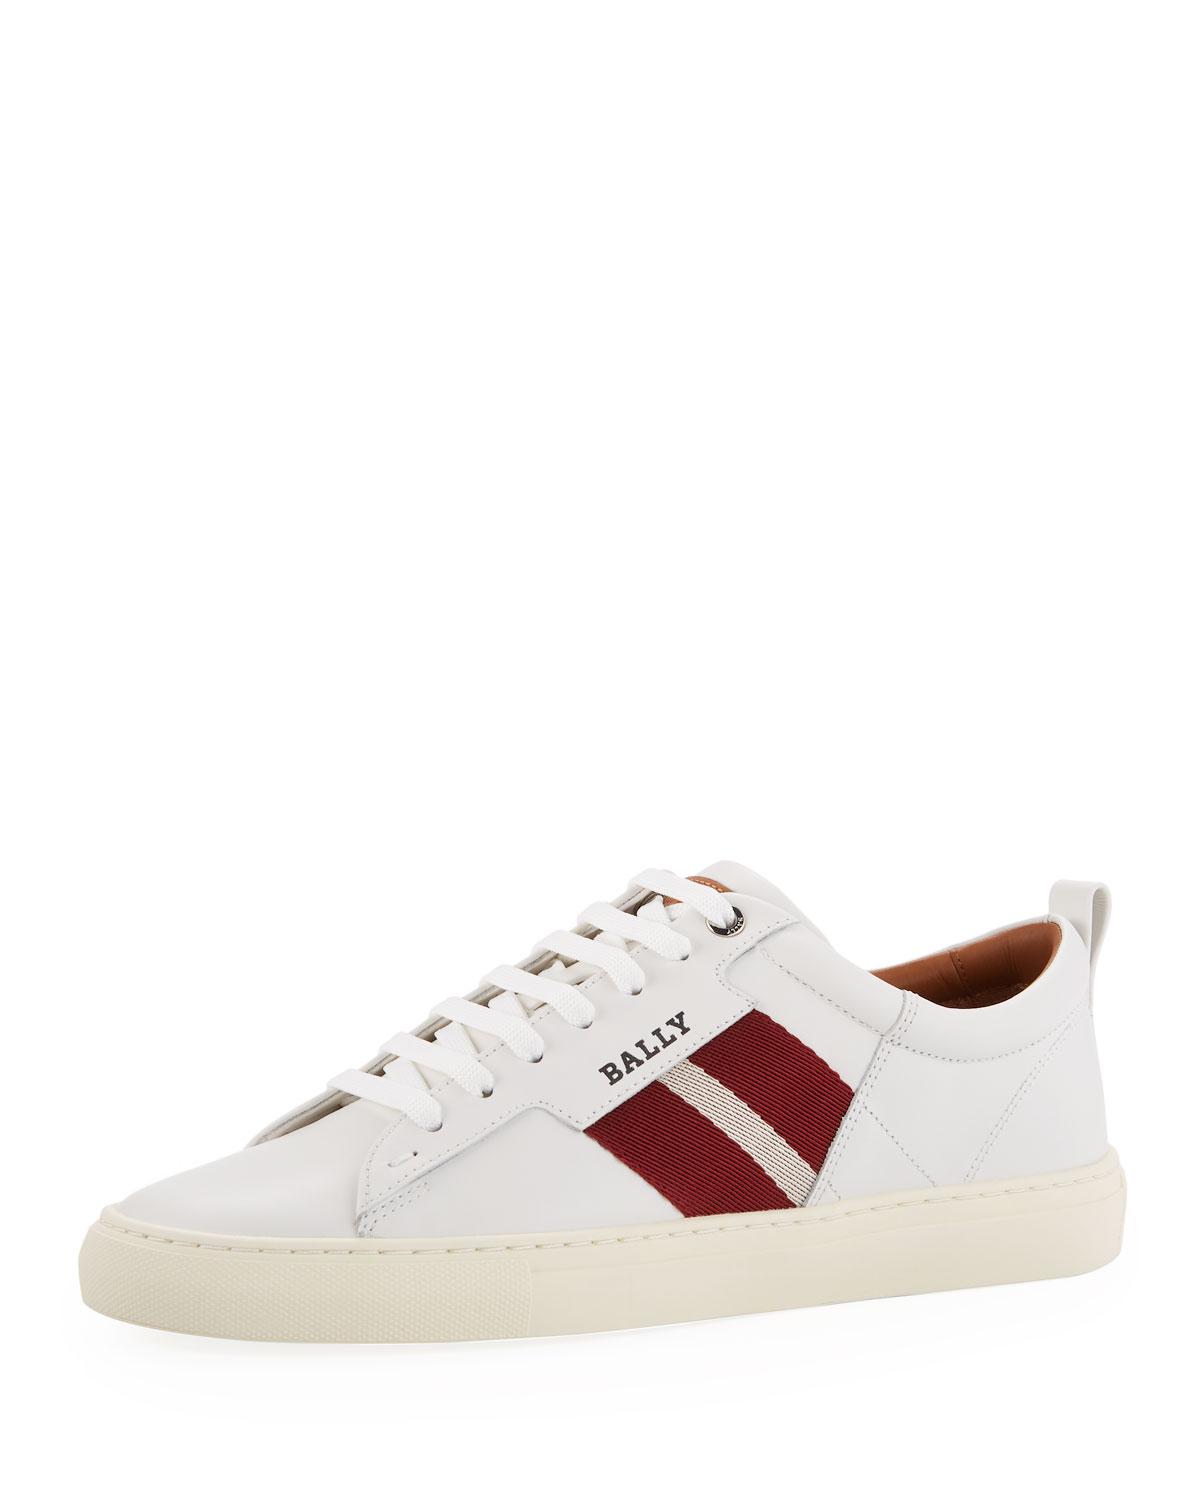 Bally Men's Helvio Leather Low-top Sneakers in White for Men - Lyst